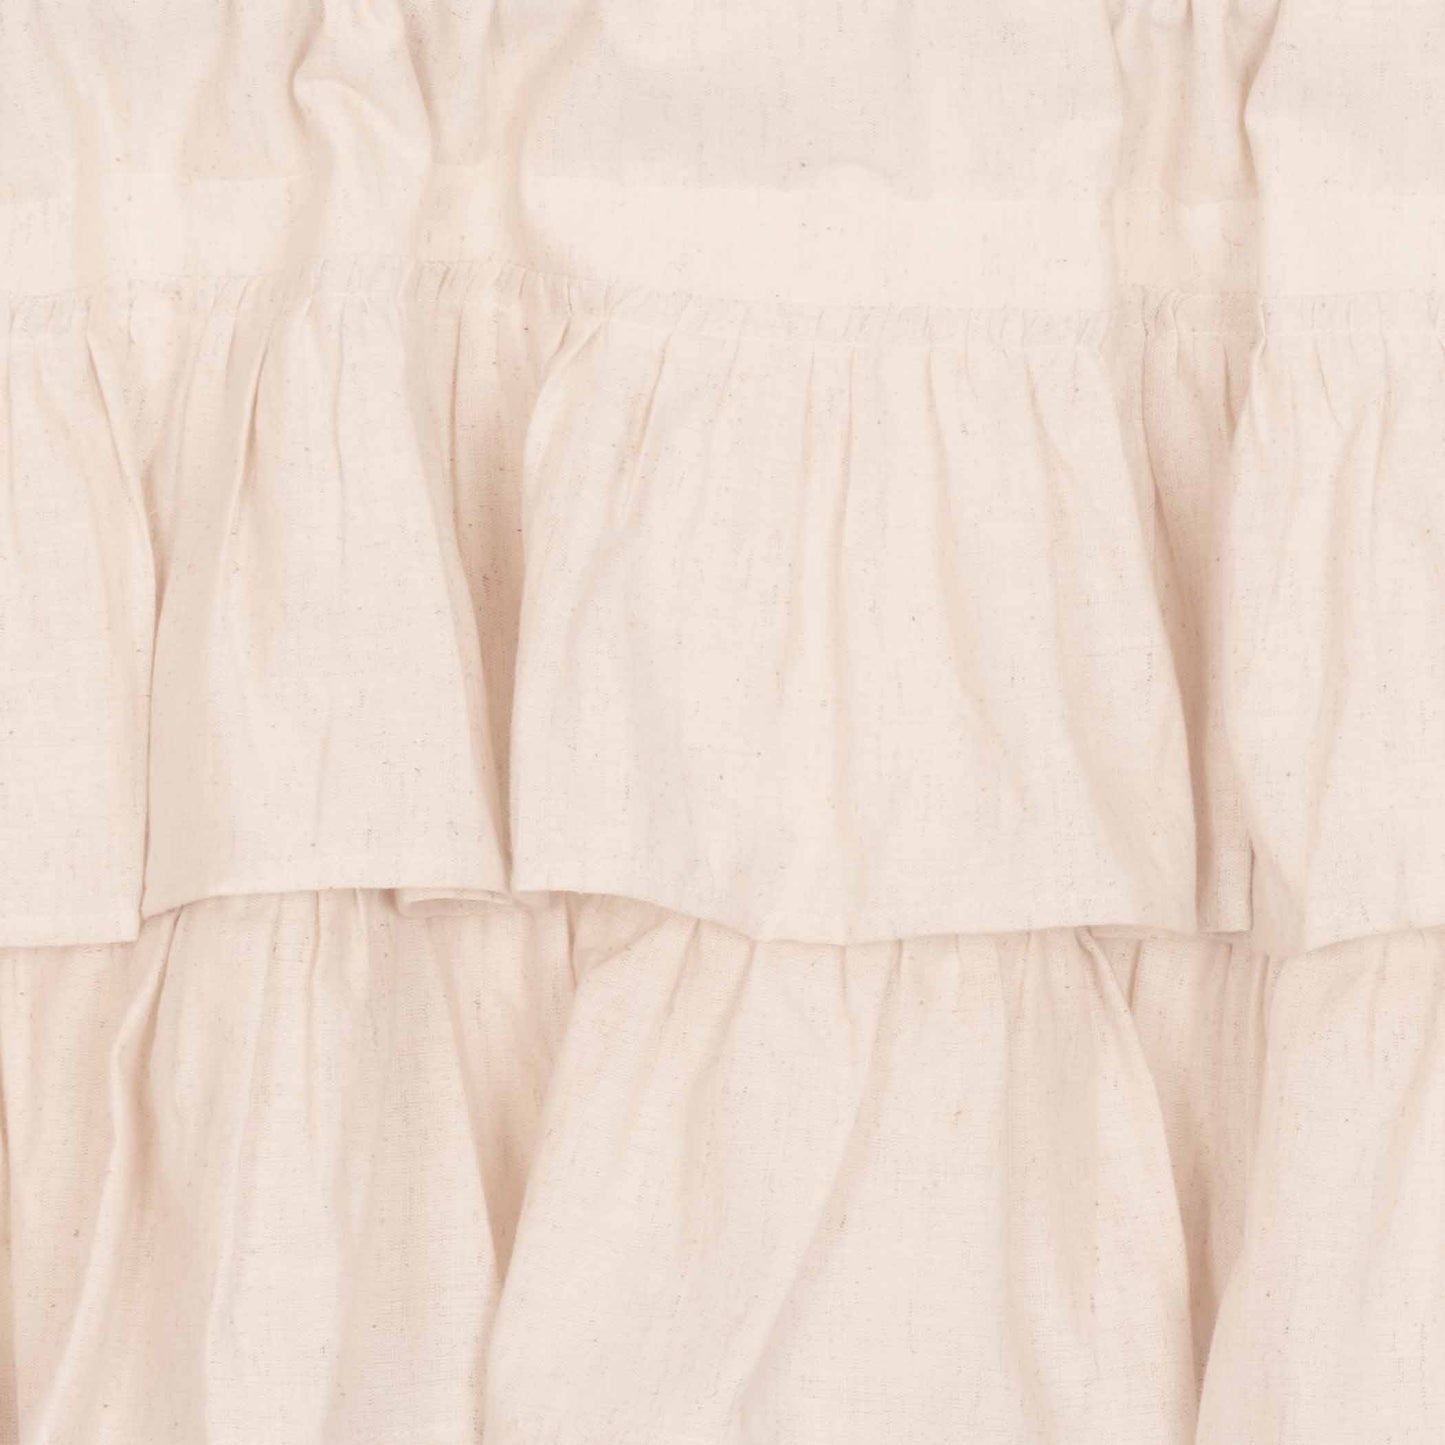 51969-Simple-Life-Flax-Natural-Ruffled-Tier-Set-of-2-L36xW36-image-8